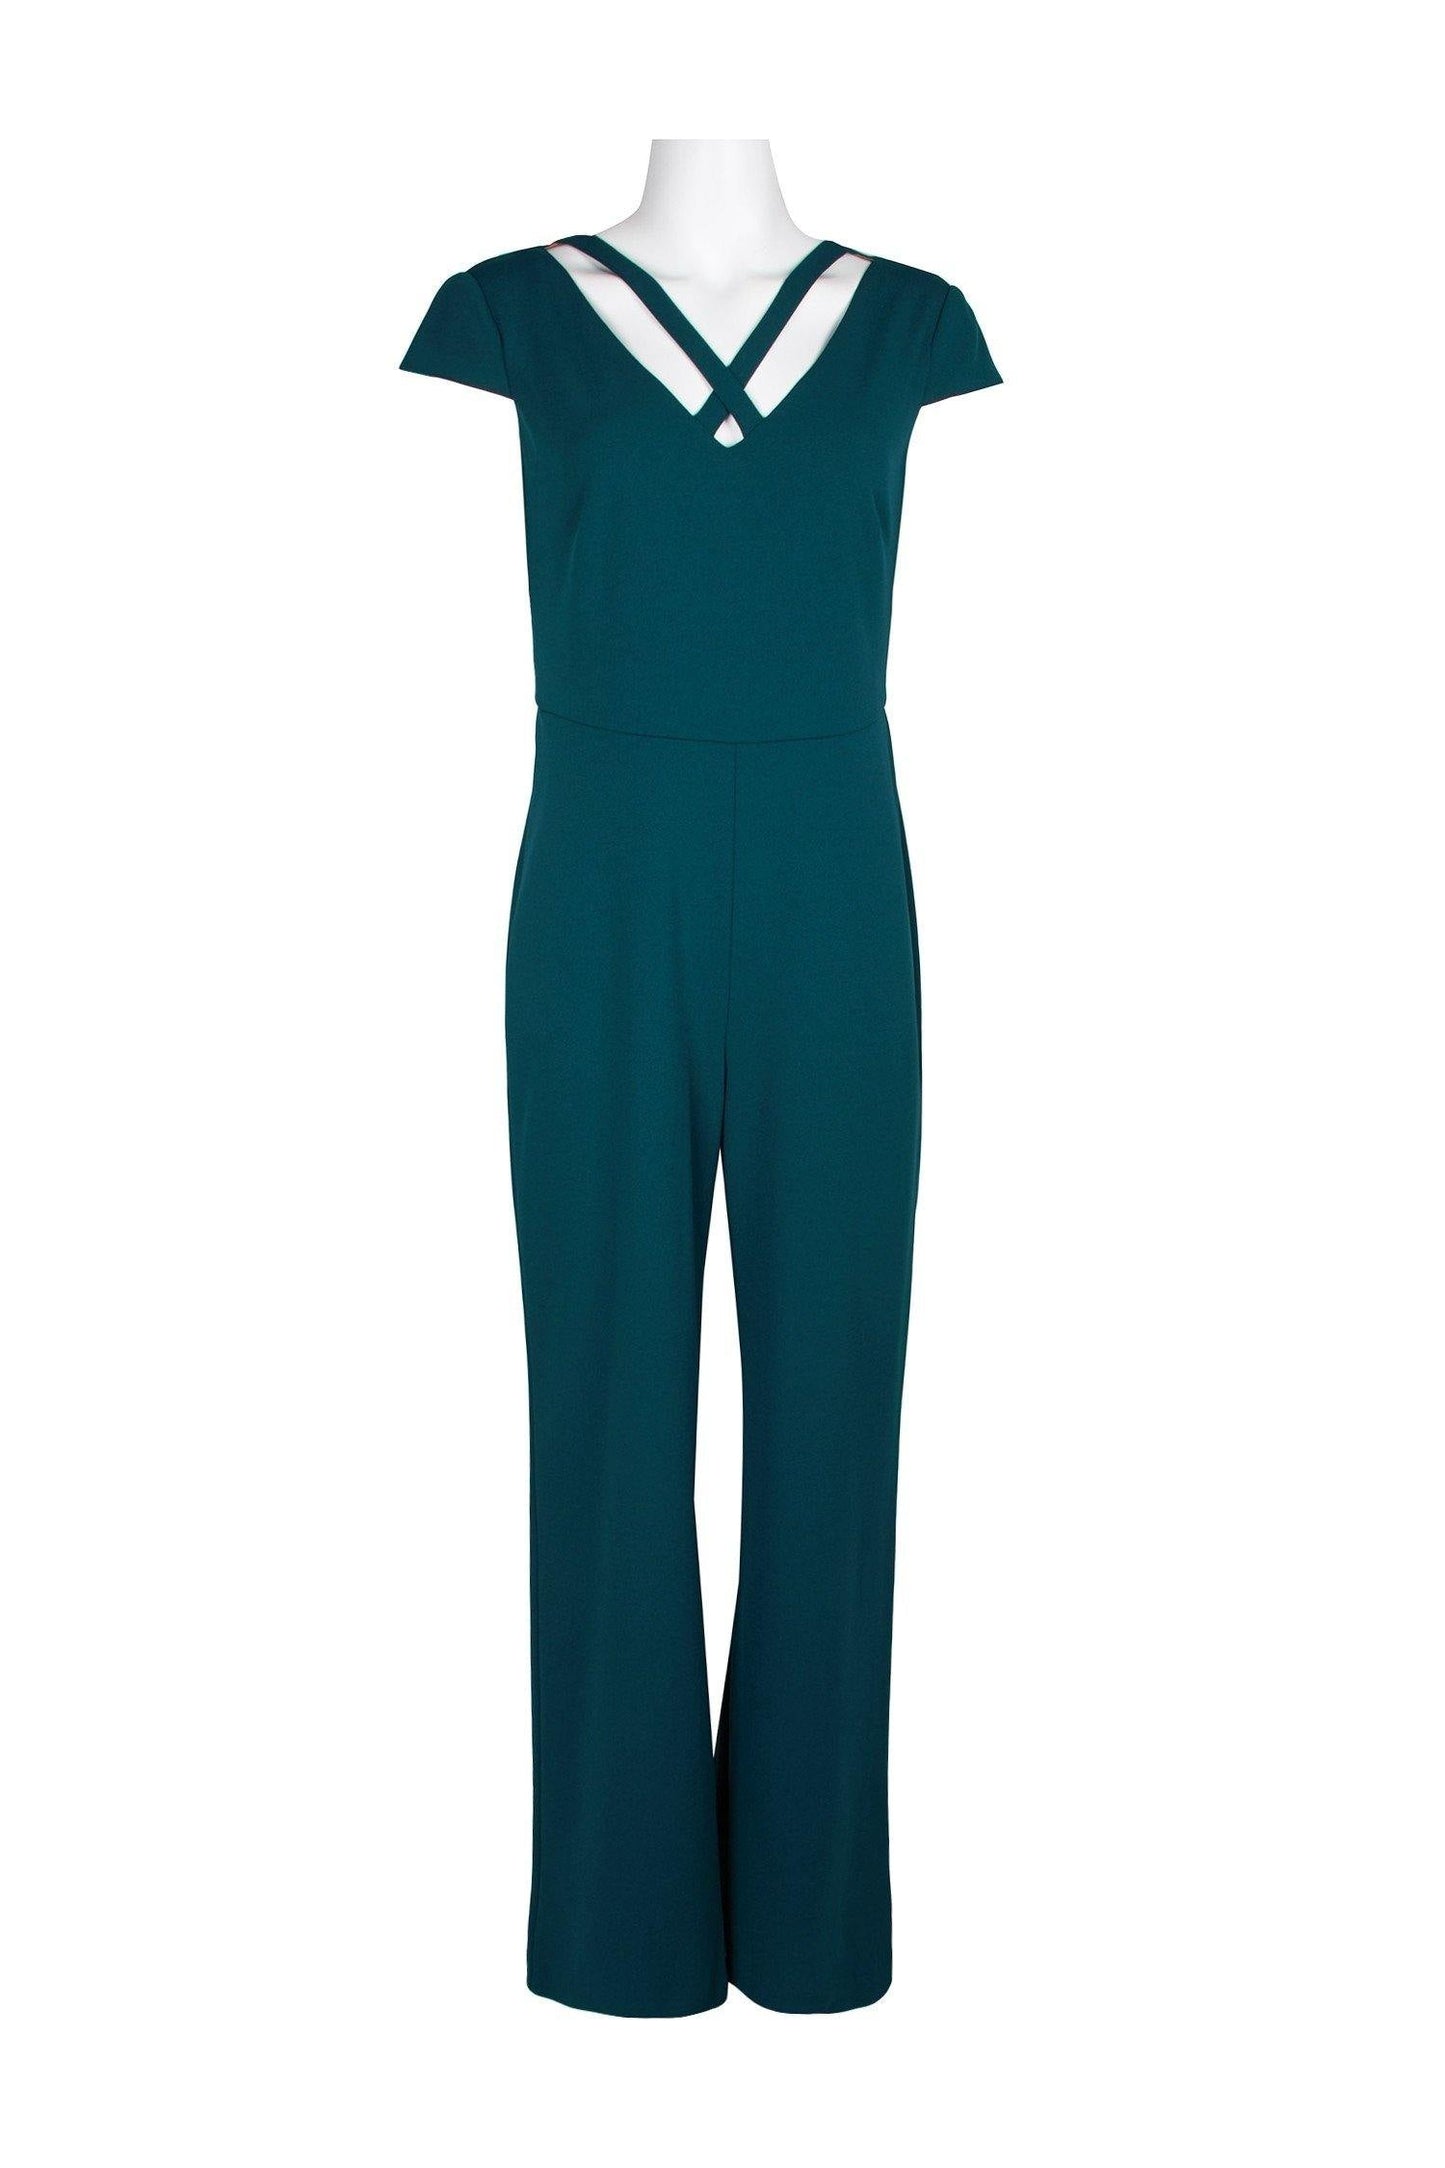 Connected Apparel Formal Crepe Jumpsuit - The Dress Outlet